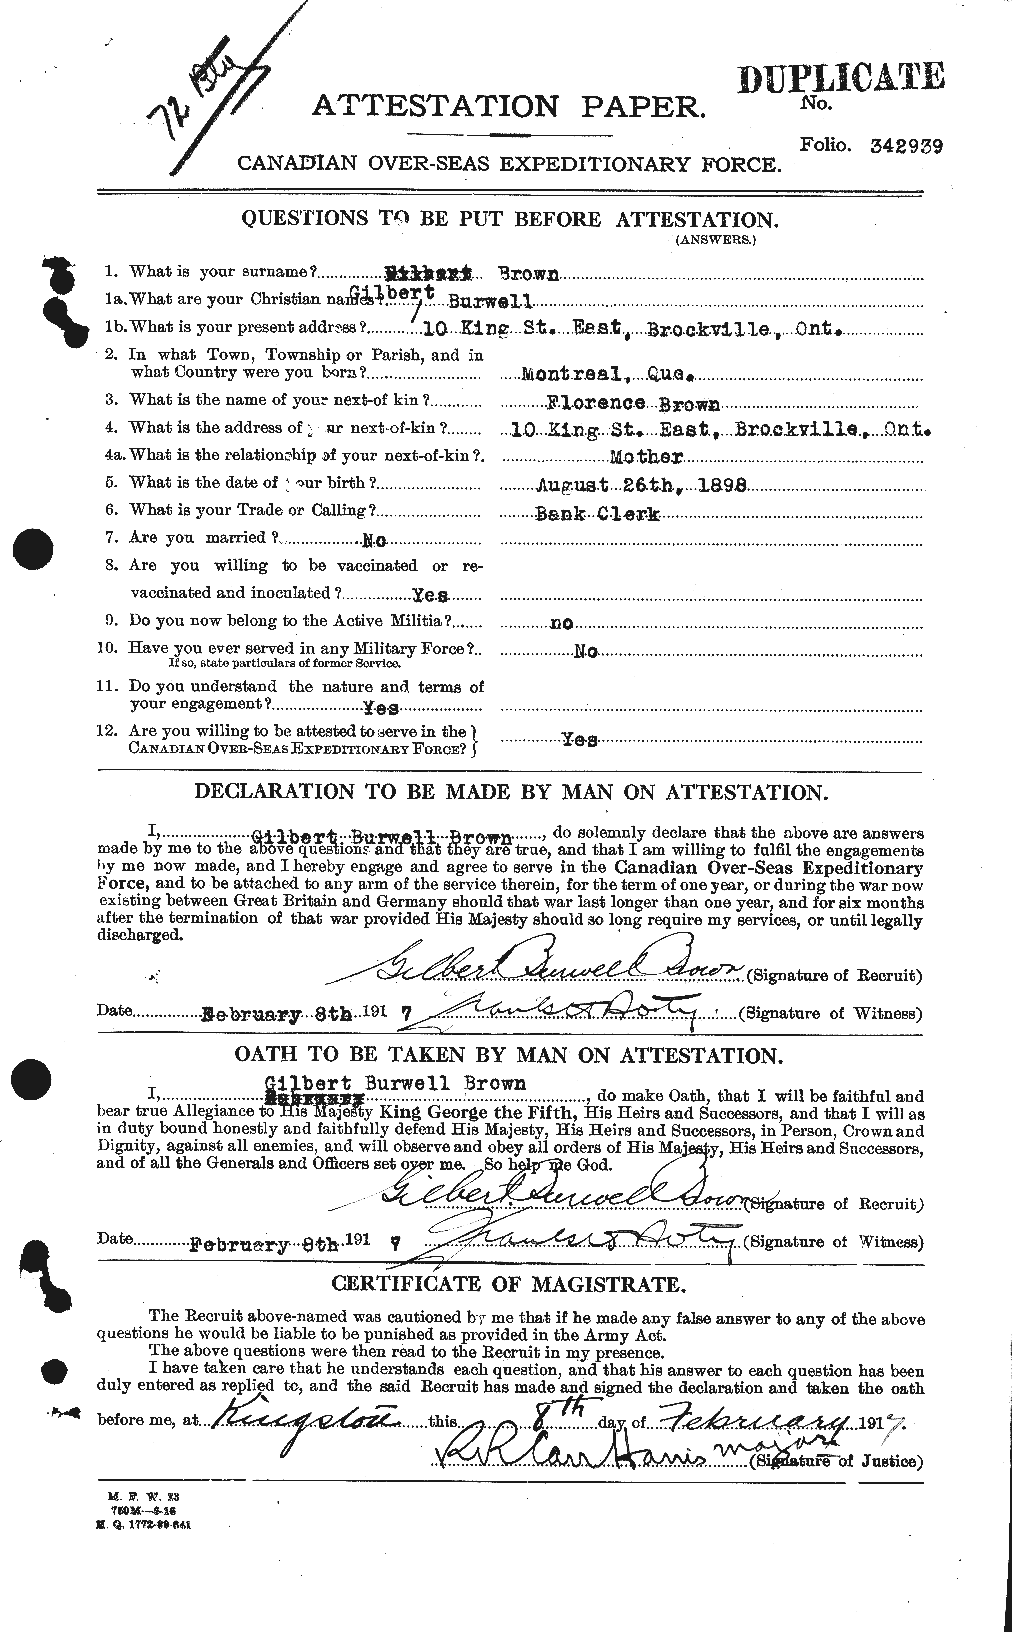 Personnel Records of the First World War - CEF 262612a